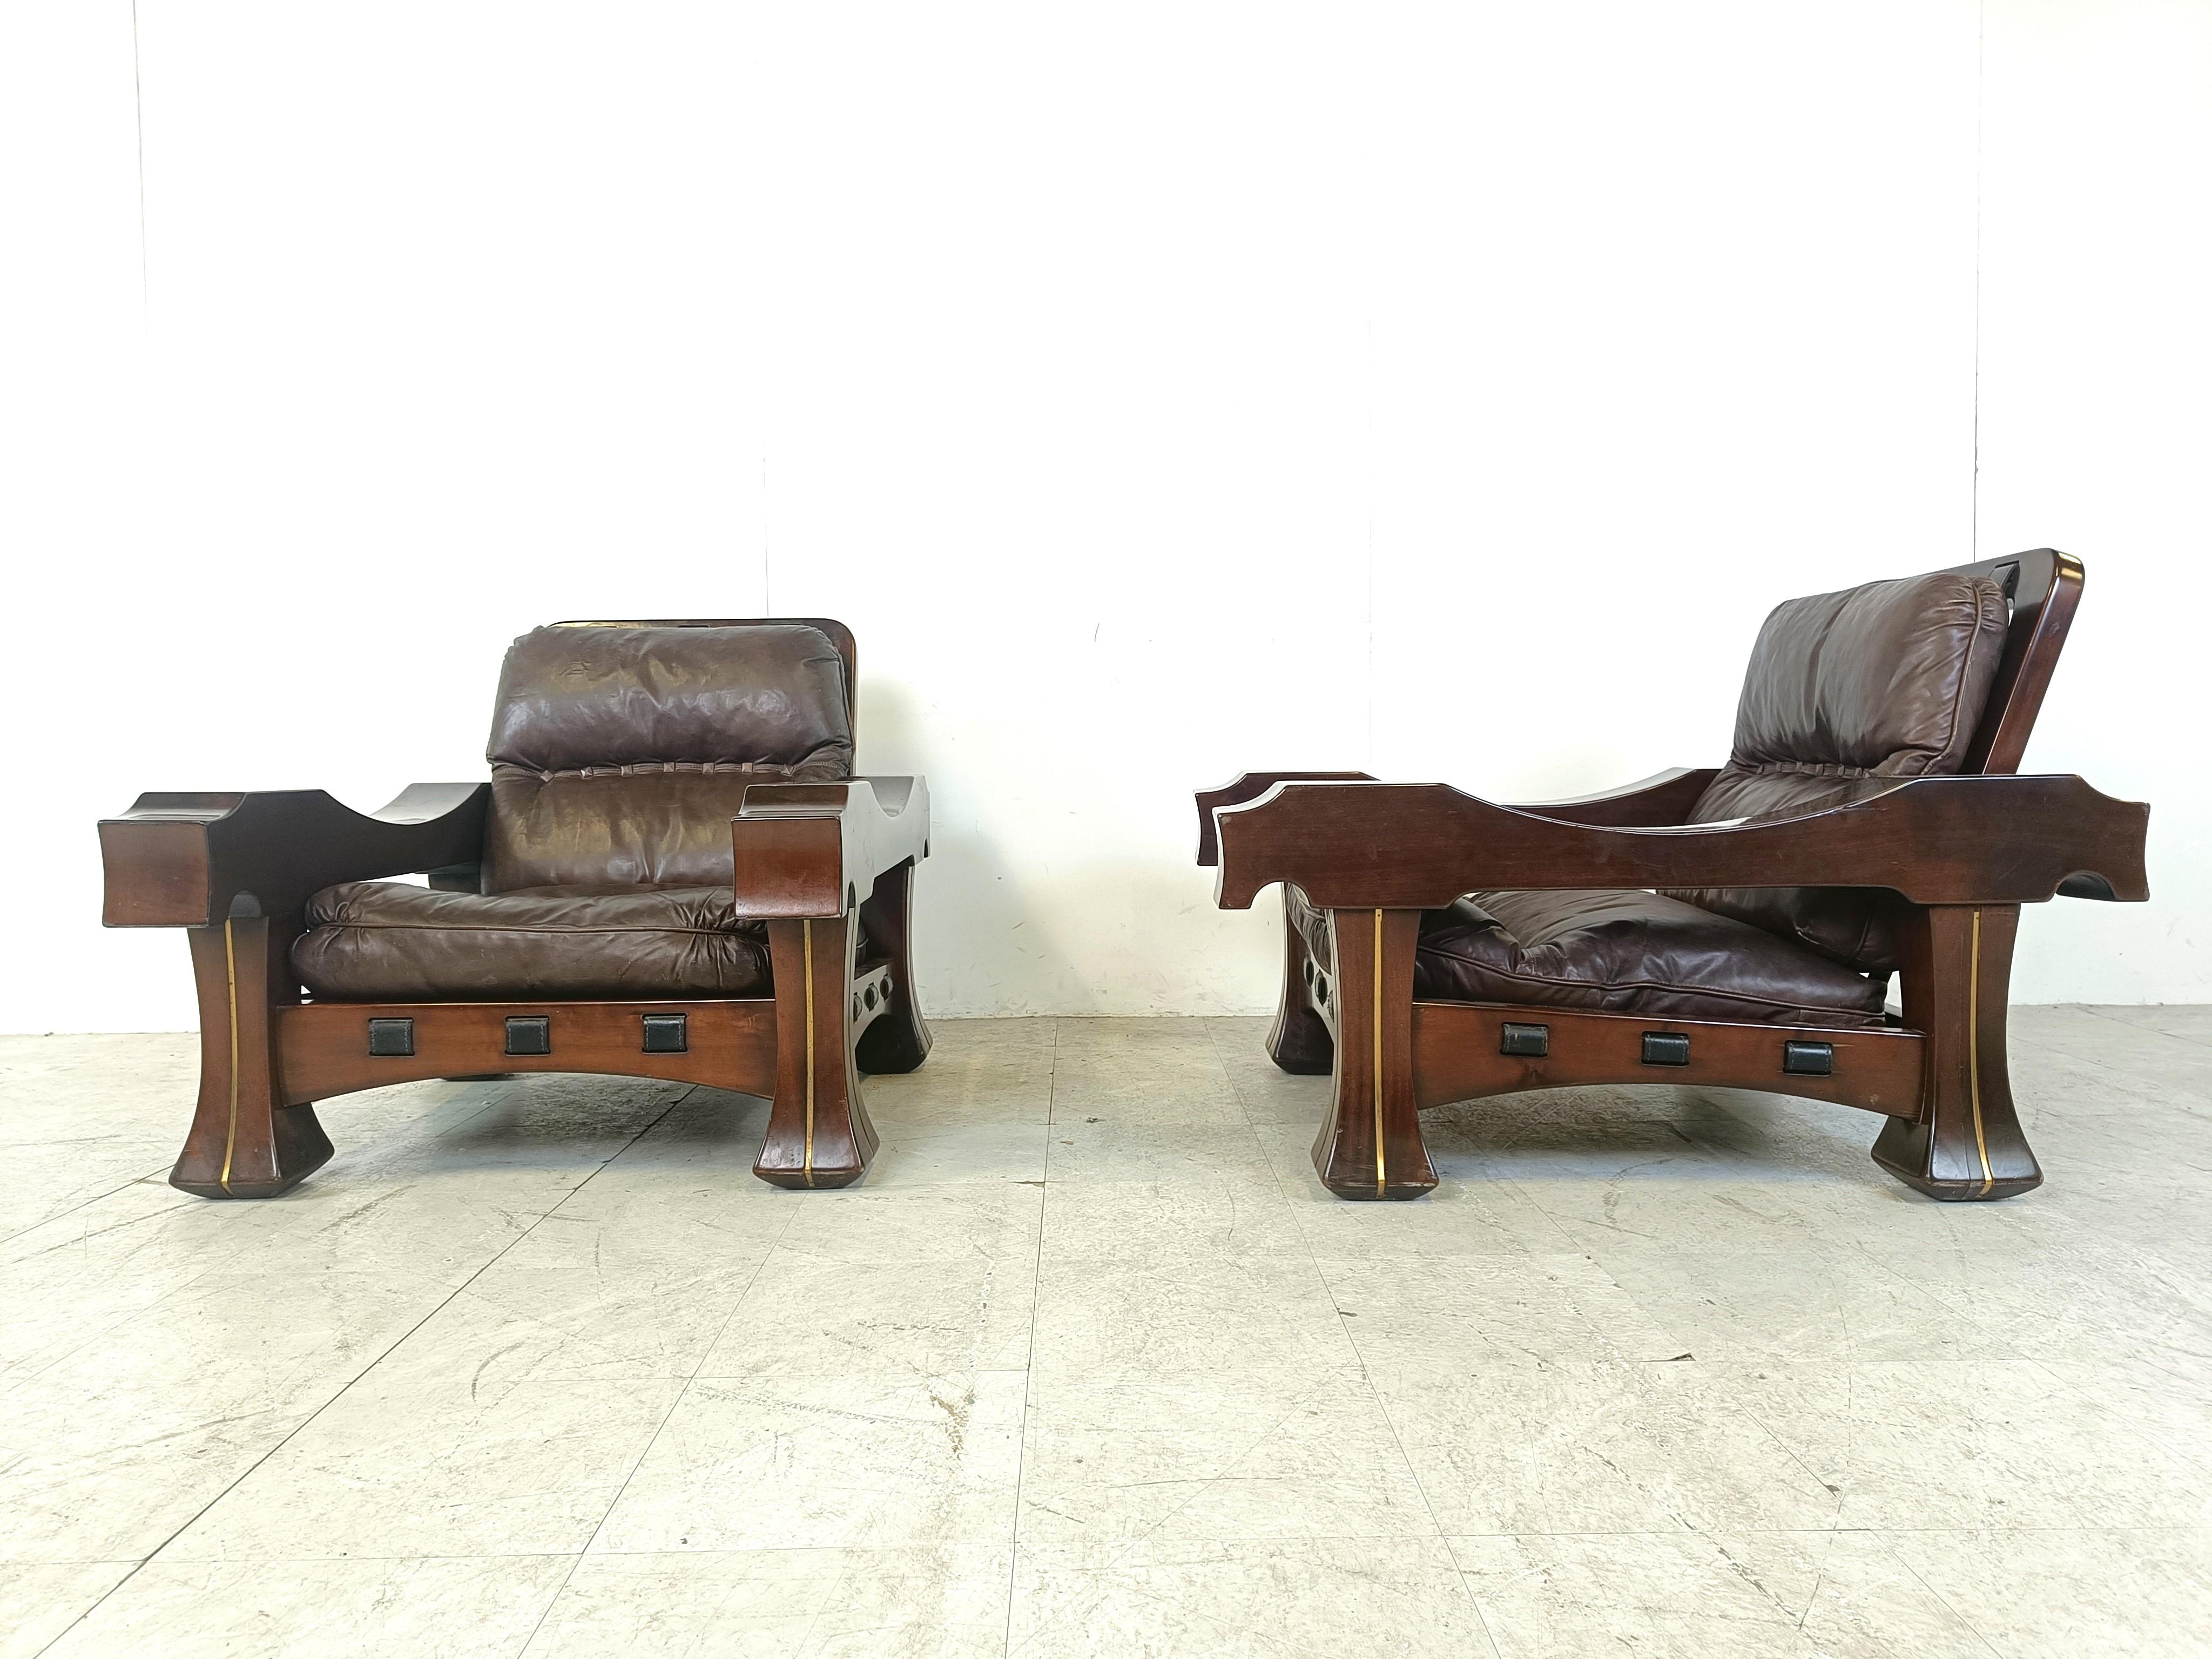 Pair of Ussaro model armchairs by Luciano Frigerio, 1960s For Sale 1